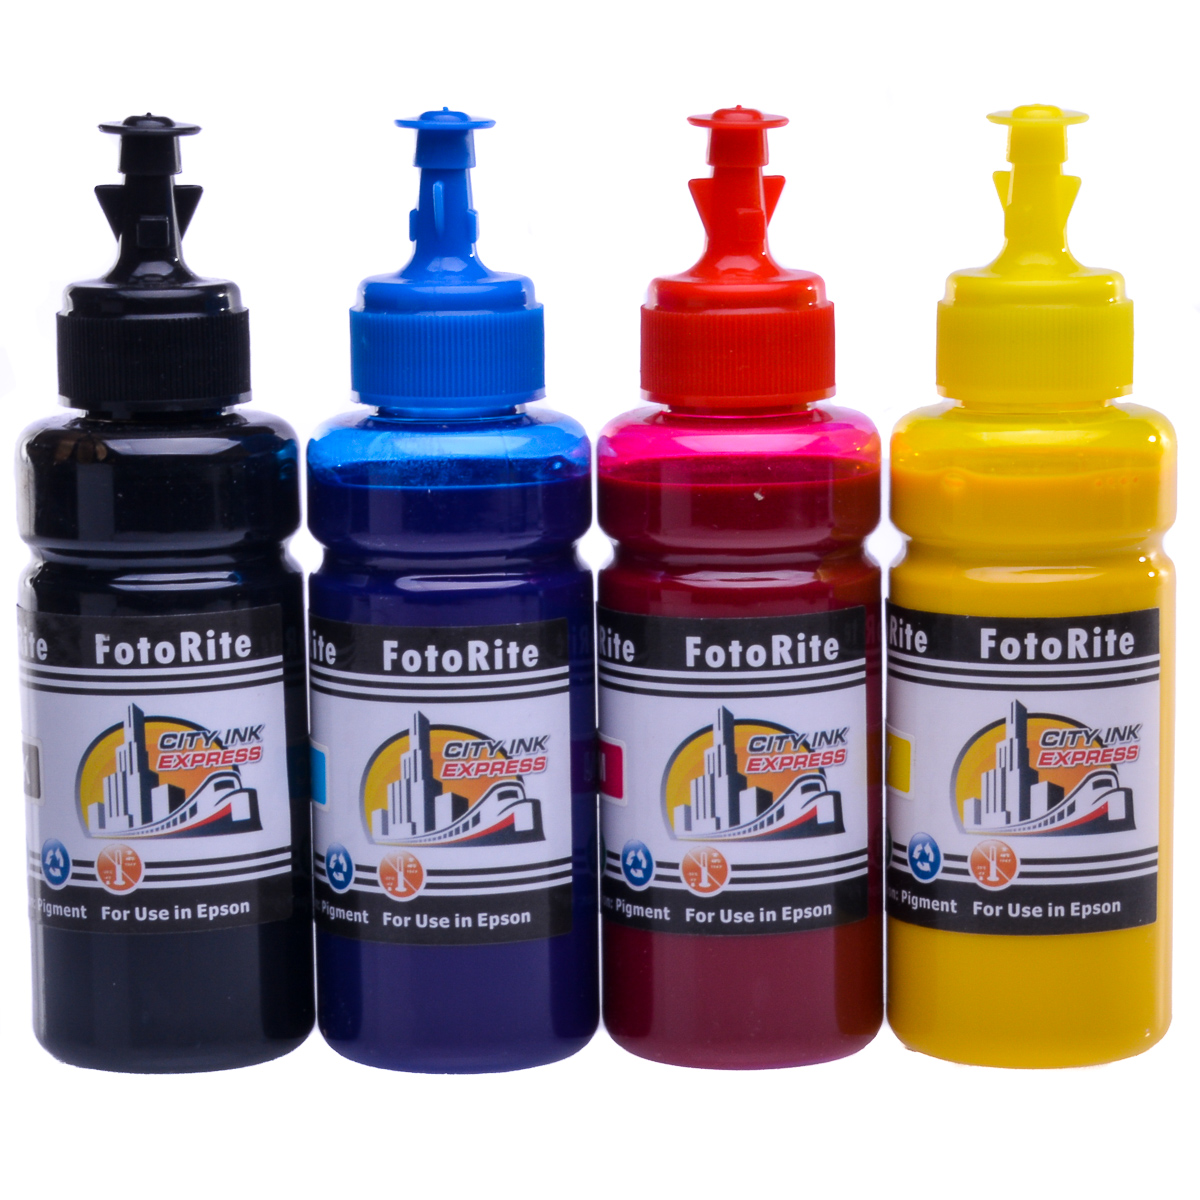 Cheap Multipack pigment ink refill replaces Epson WF-4740DTWF